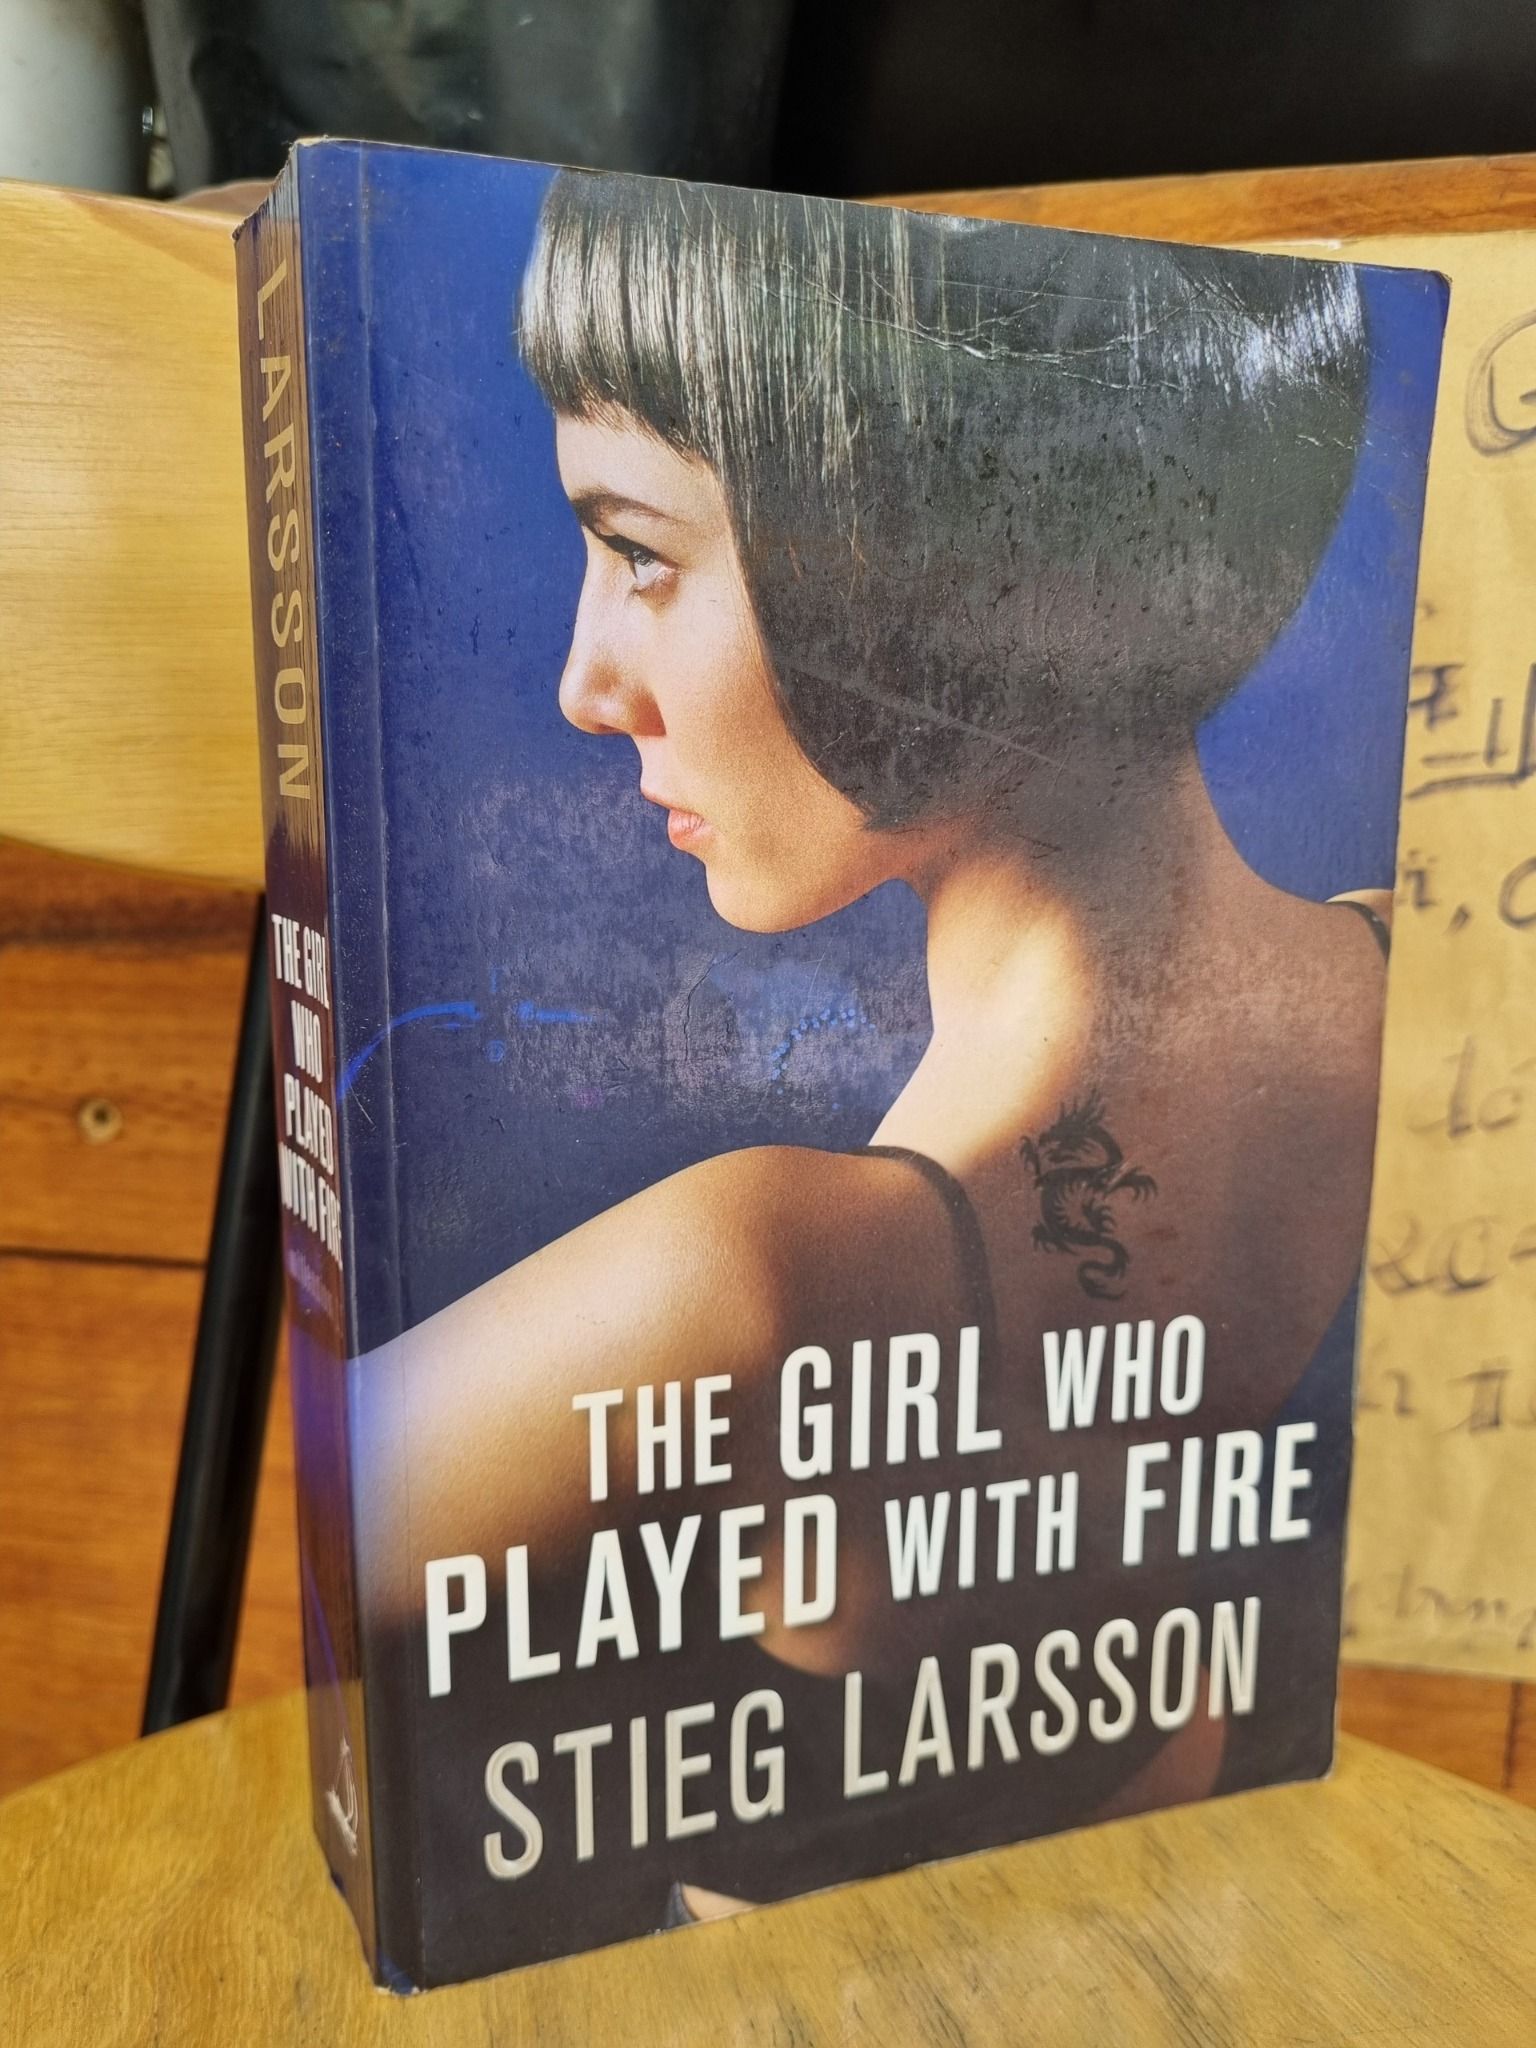  THE GIRL WHO PLAYED WITH FIRE - STIEG LARSSON 